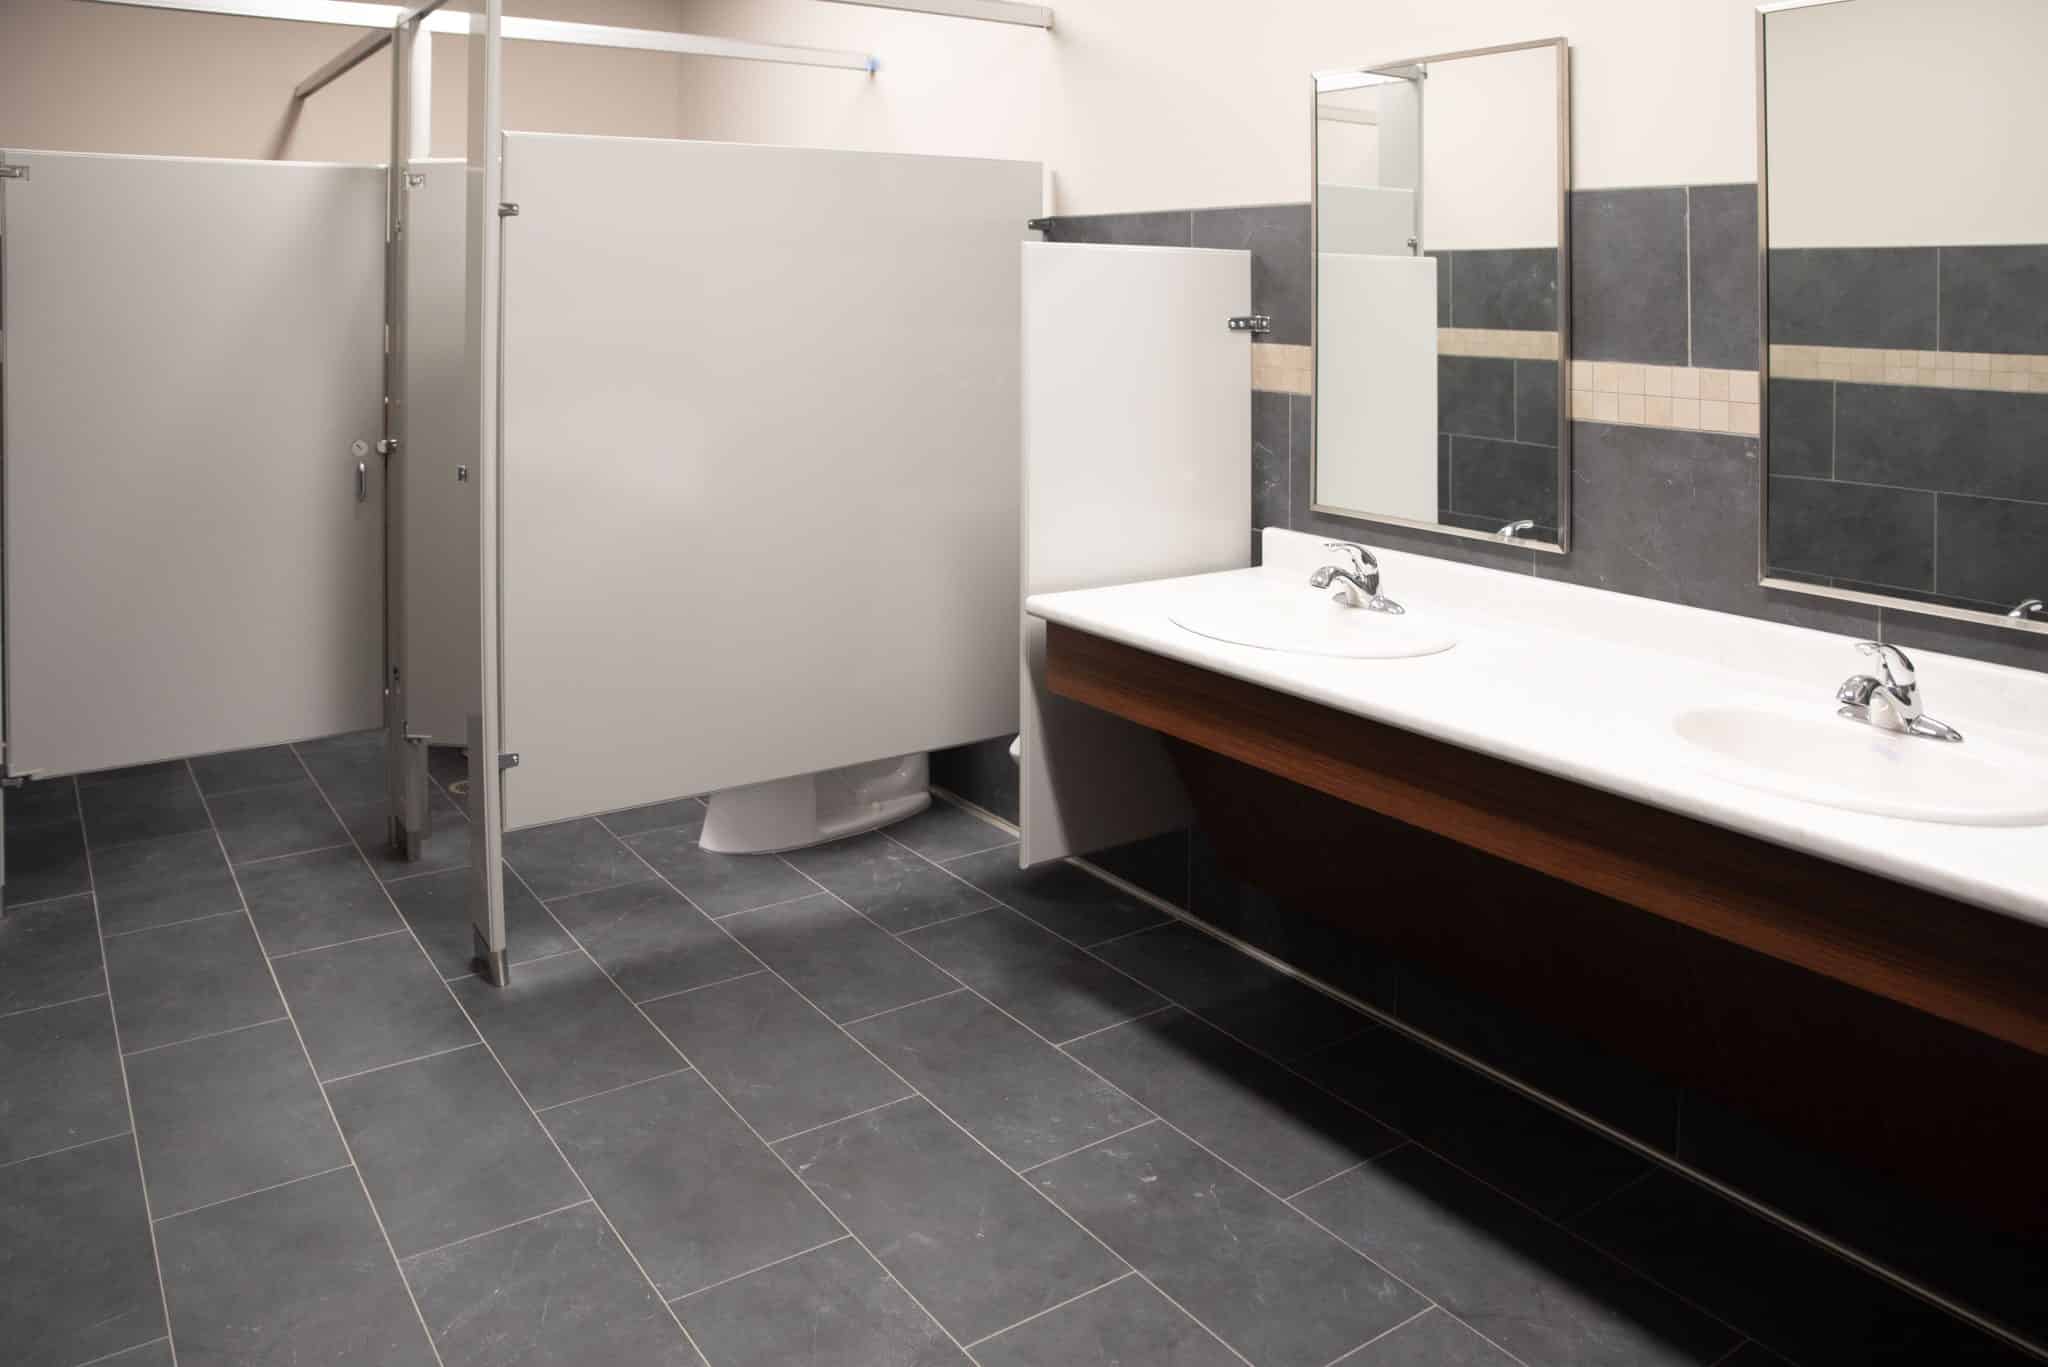 men's restroom with slate tile, two sinks, and gray partitions